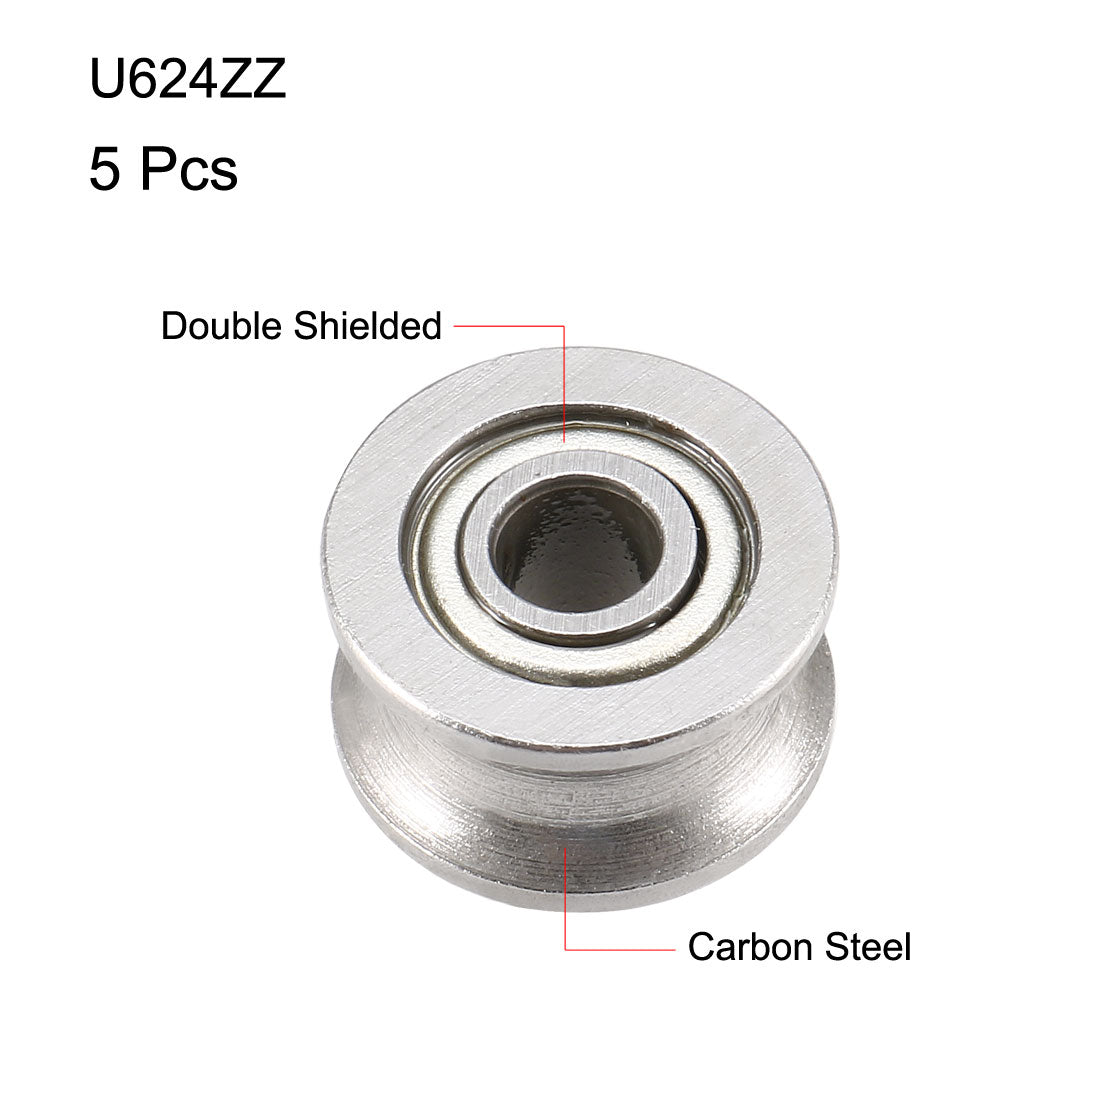 uxcell Uxcell U624ZZ Deep Groove Guide Pulley Rail Ball Bearings 4mmx13mmx7mm Double Metal Shielded Carbon Steel Bearings 5pcs